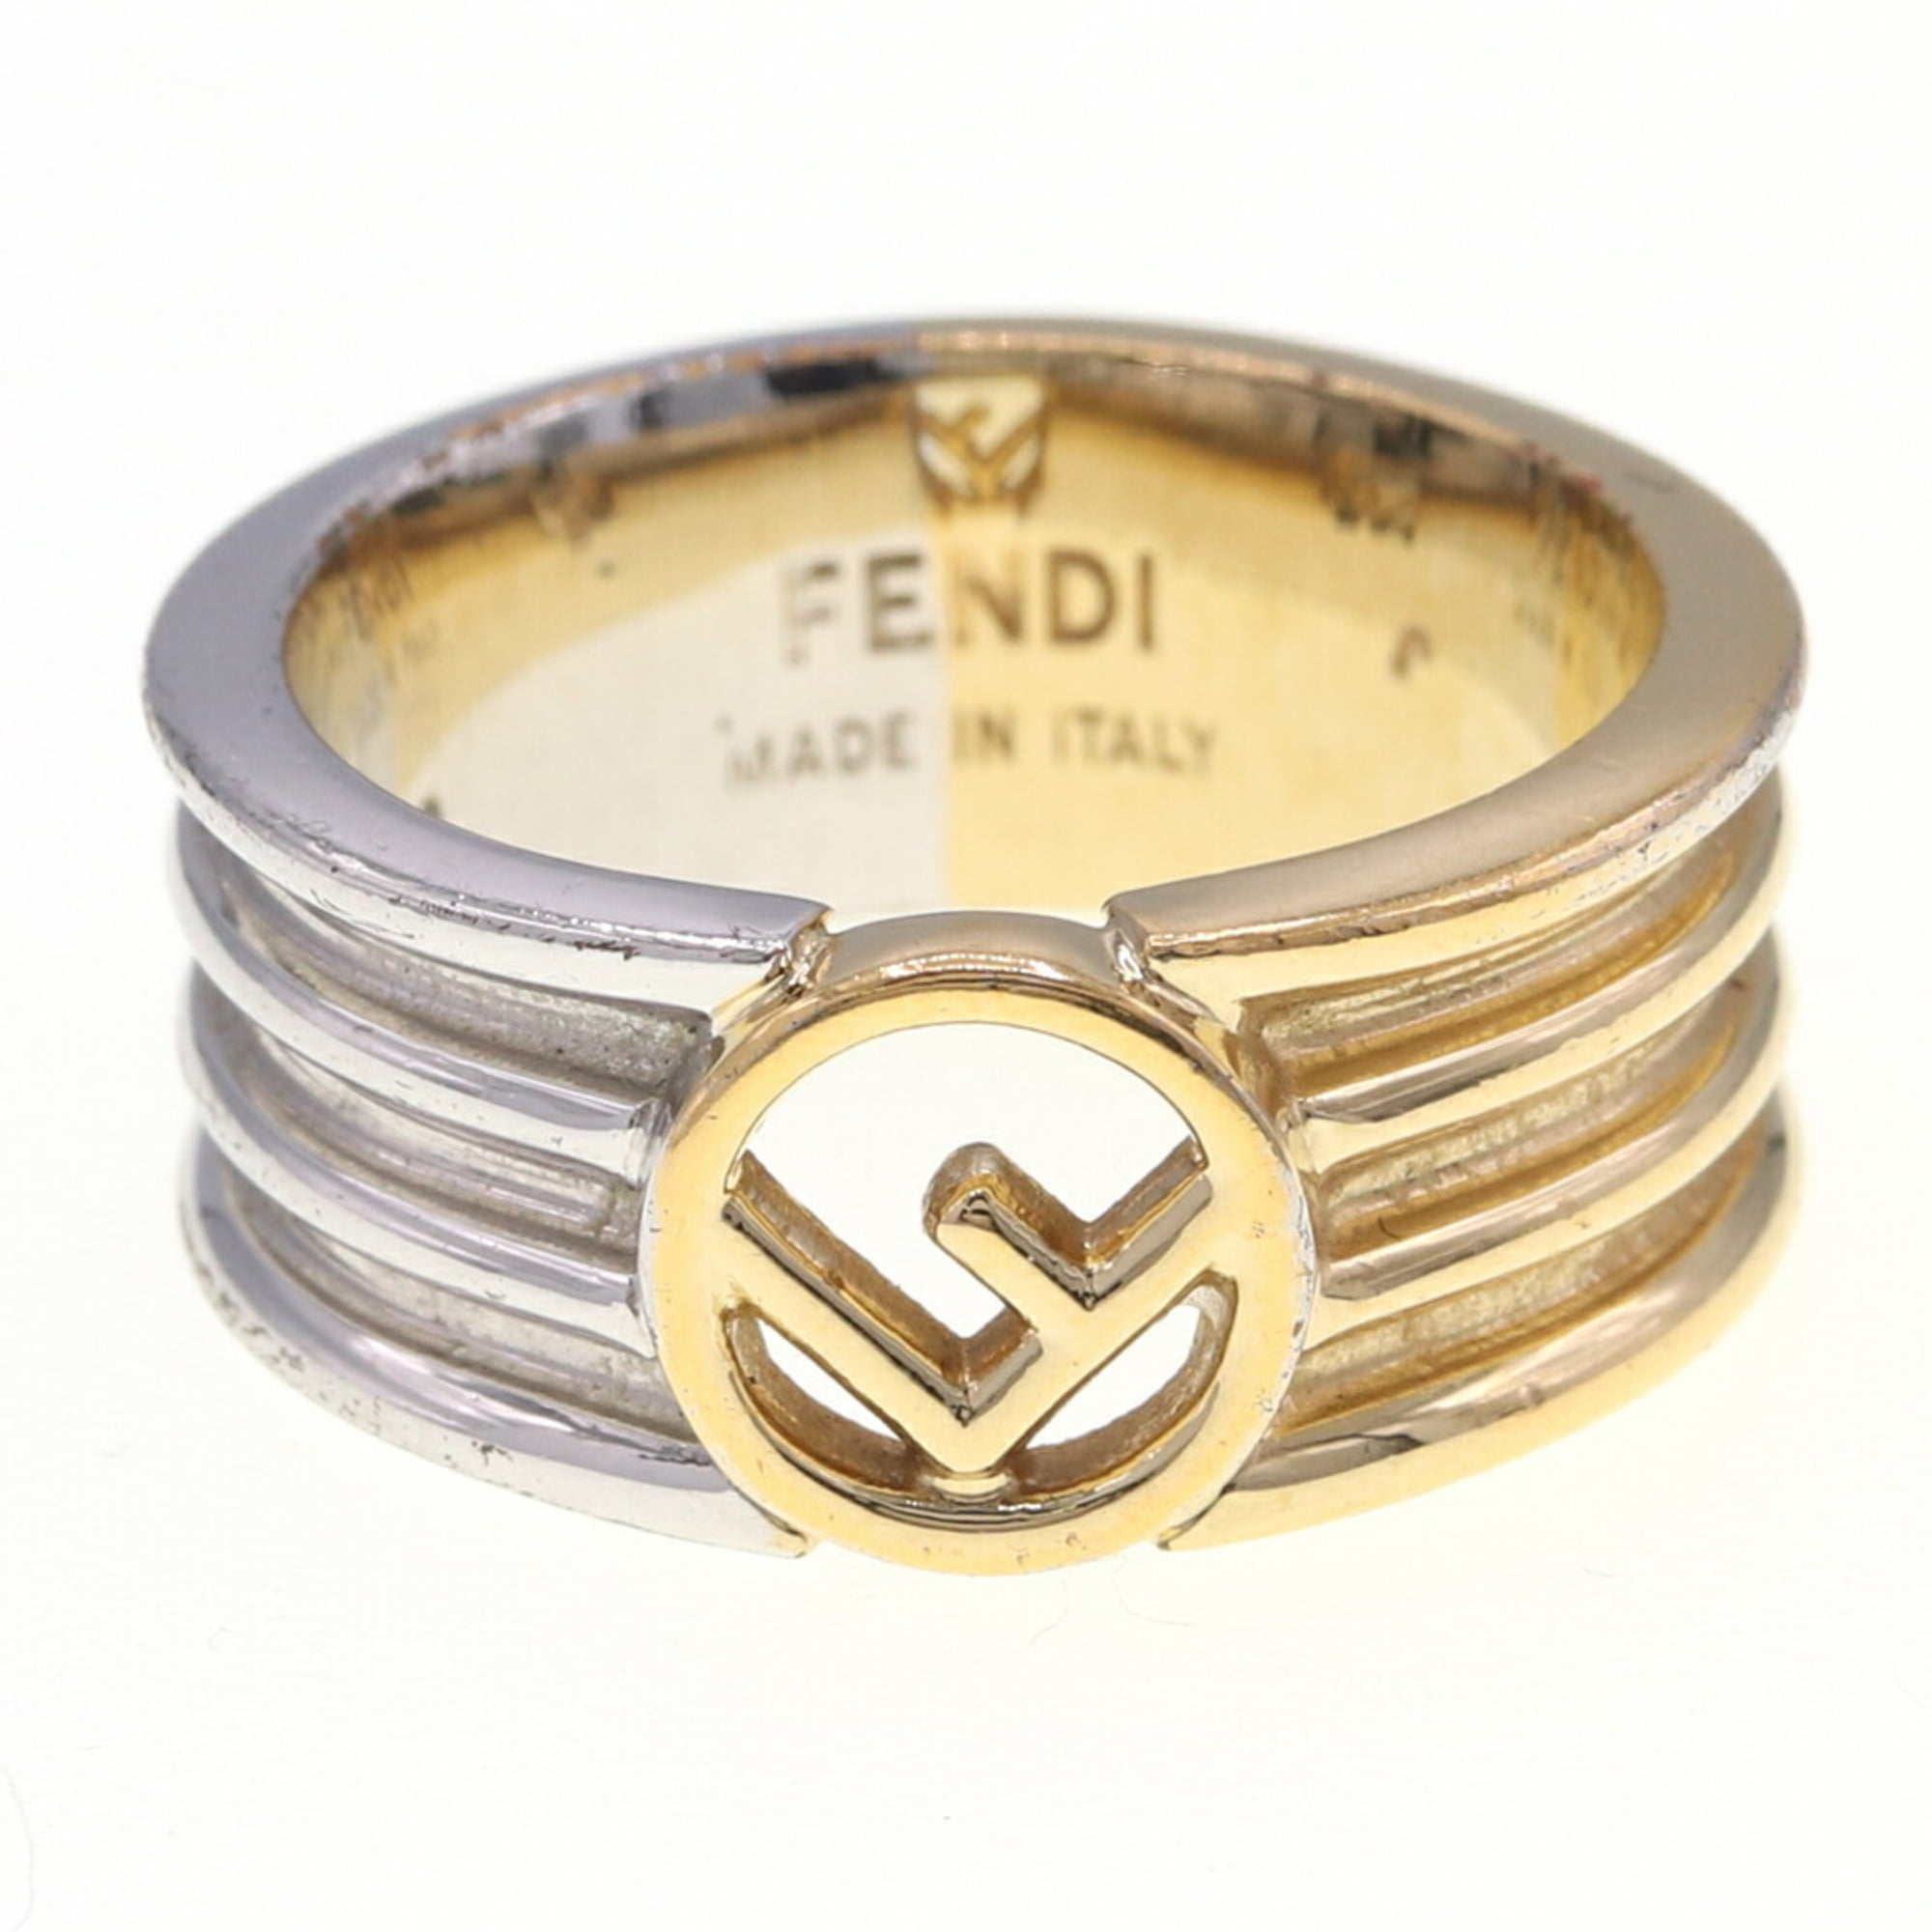 Pre-Owned Fendi ring F is 8AG796 gold silver metal S size 11.5